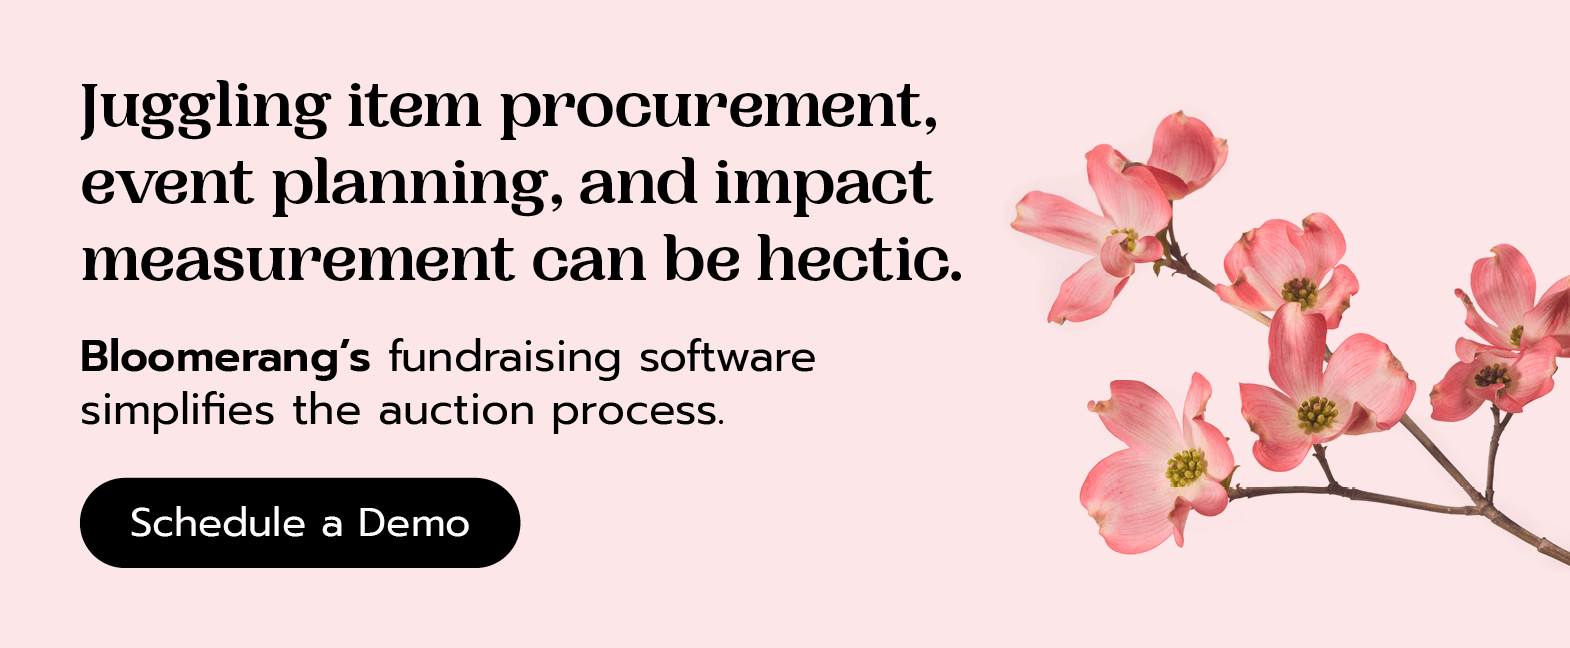 Juggling item procurement, event planning, and impact measurement can be hectic. Bloomerang’s fundraising software streamlines the auction process. Schedule a demo here. 